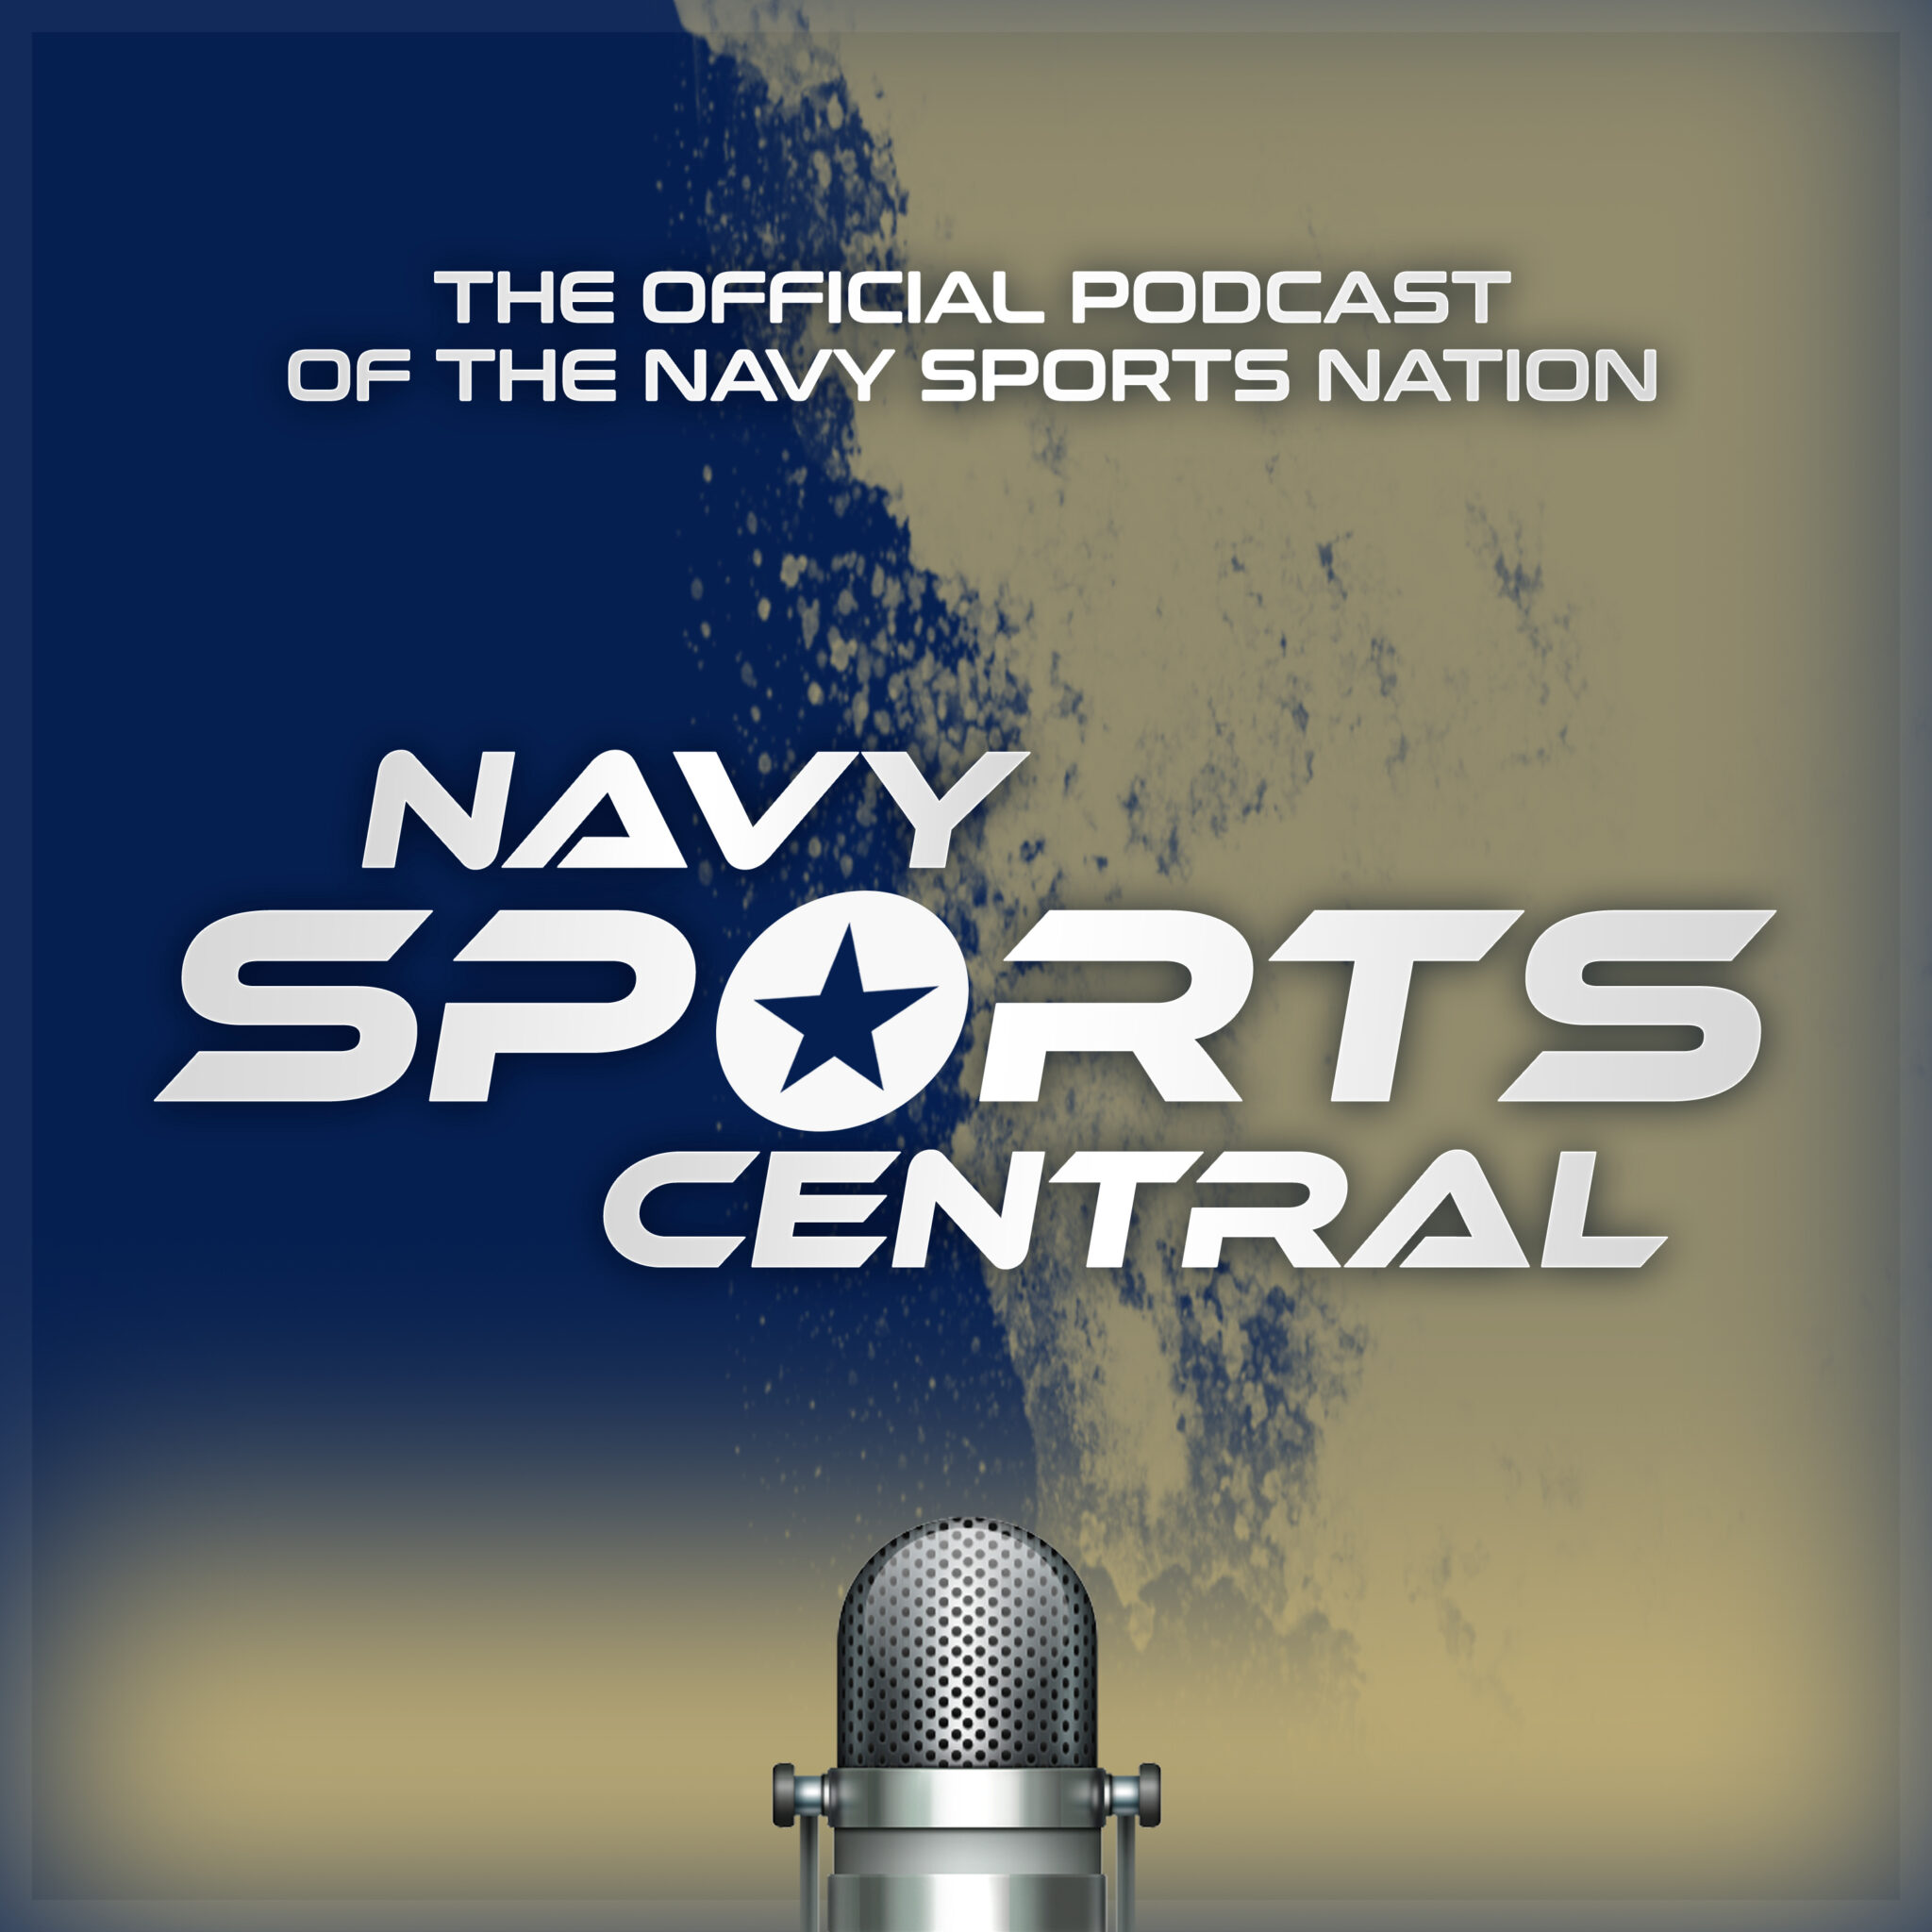 Introducing Navy Sports Central - The Official Podcast of the Navy Sports Nation